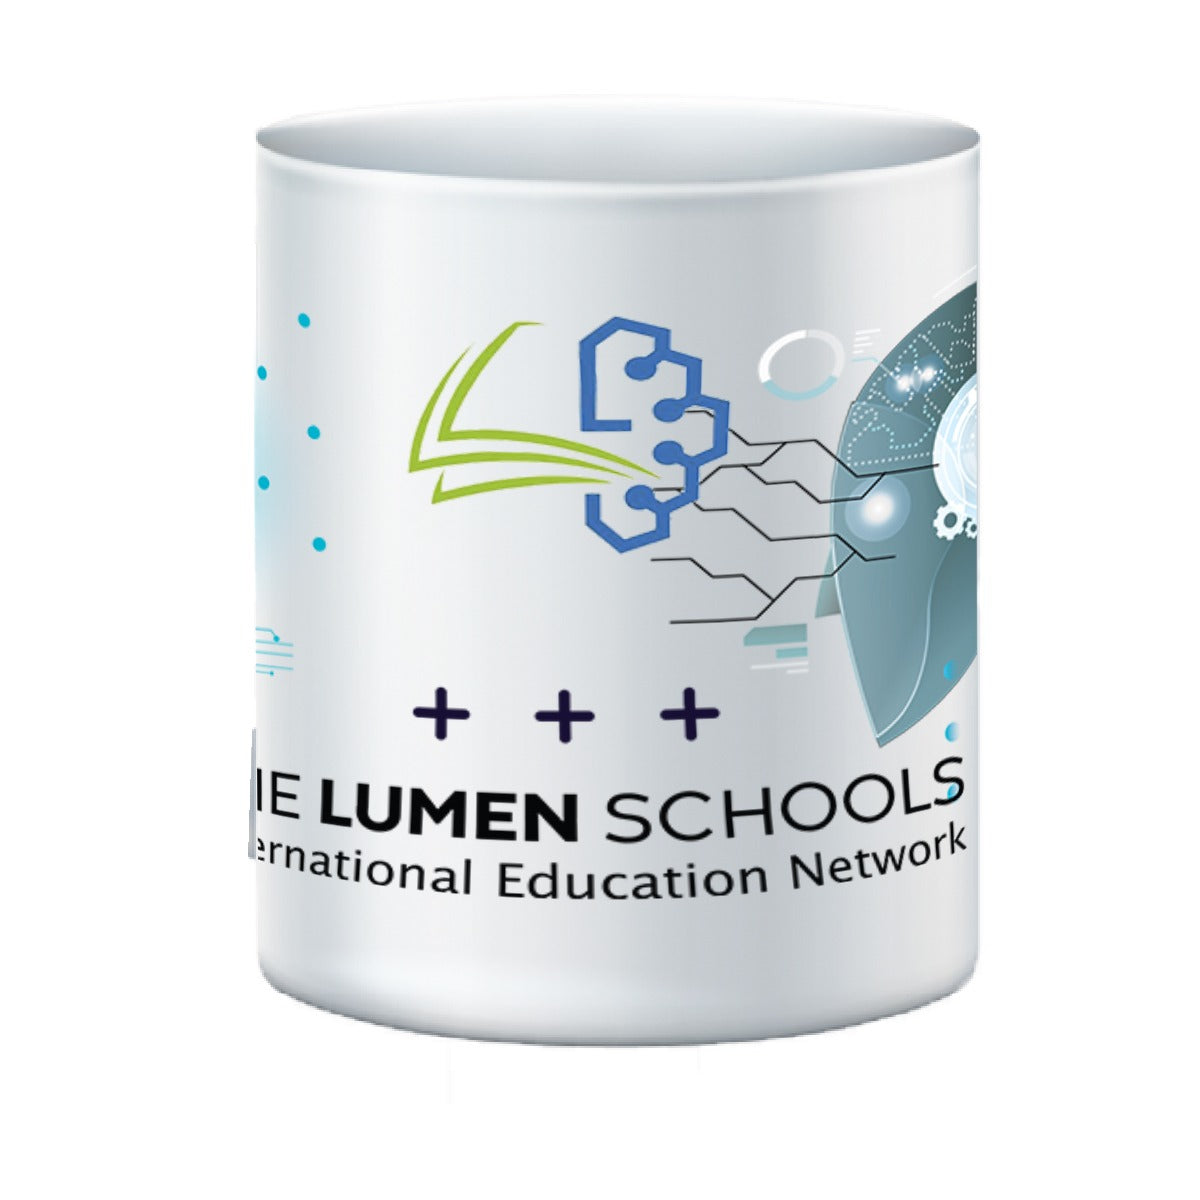 Customized Mugs for Schools: Choose Your Own Design